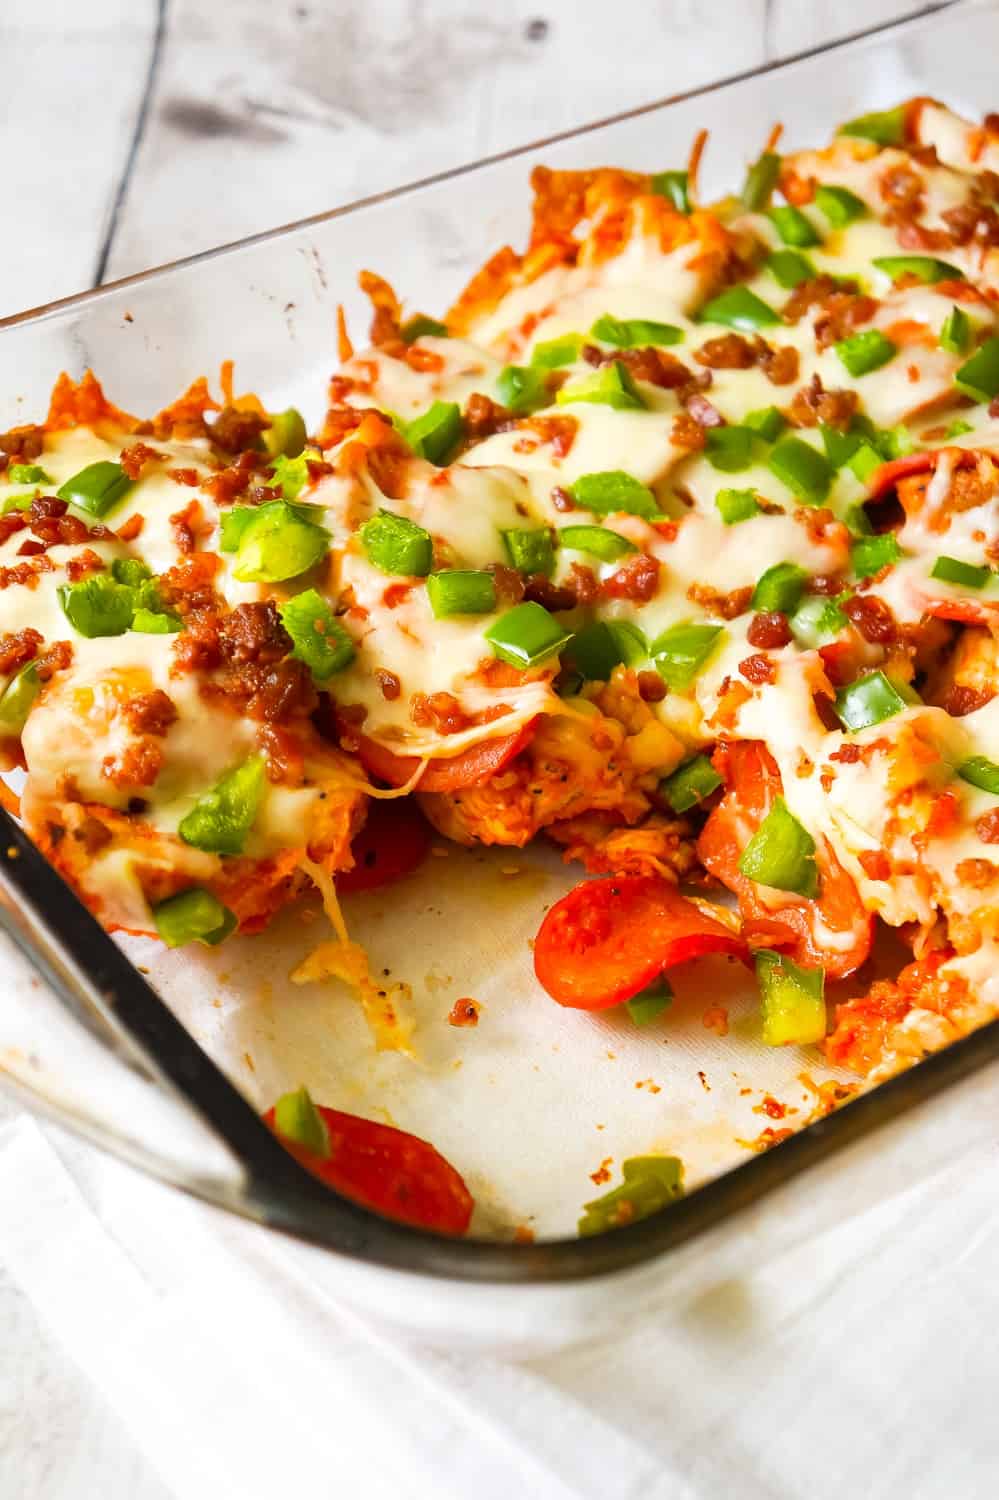 Pizza Bagel Casserole is an easy dinner recipe the whole family will love. This everything bagel casserole is loaded with pepperoni, pizza sauce, green peppers, bacon and cheese.